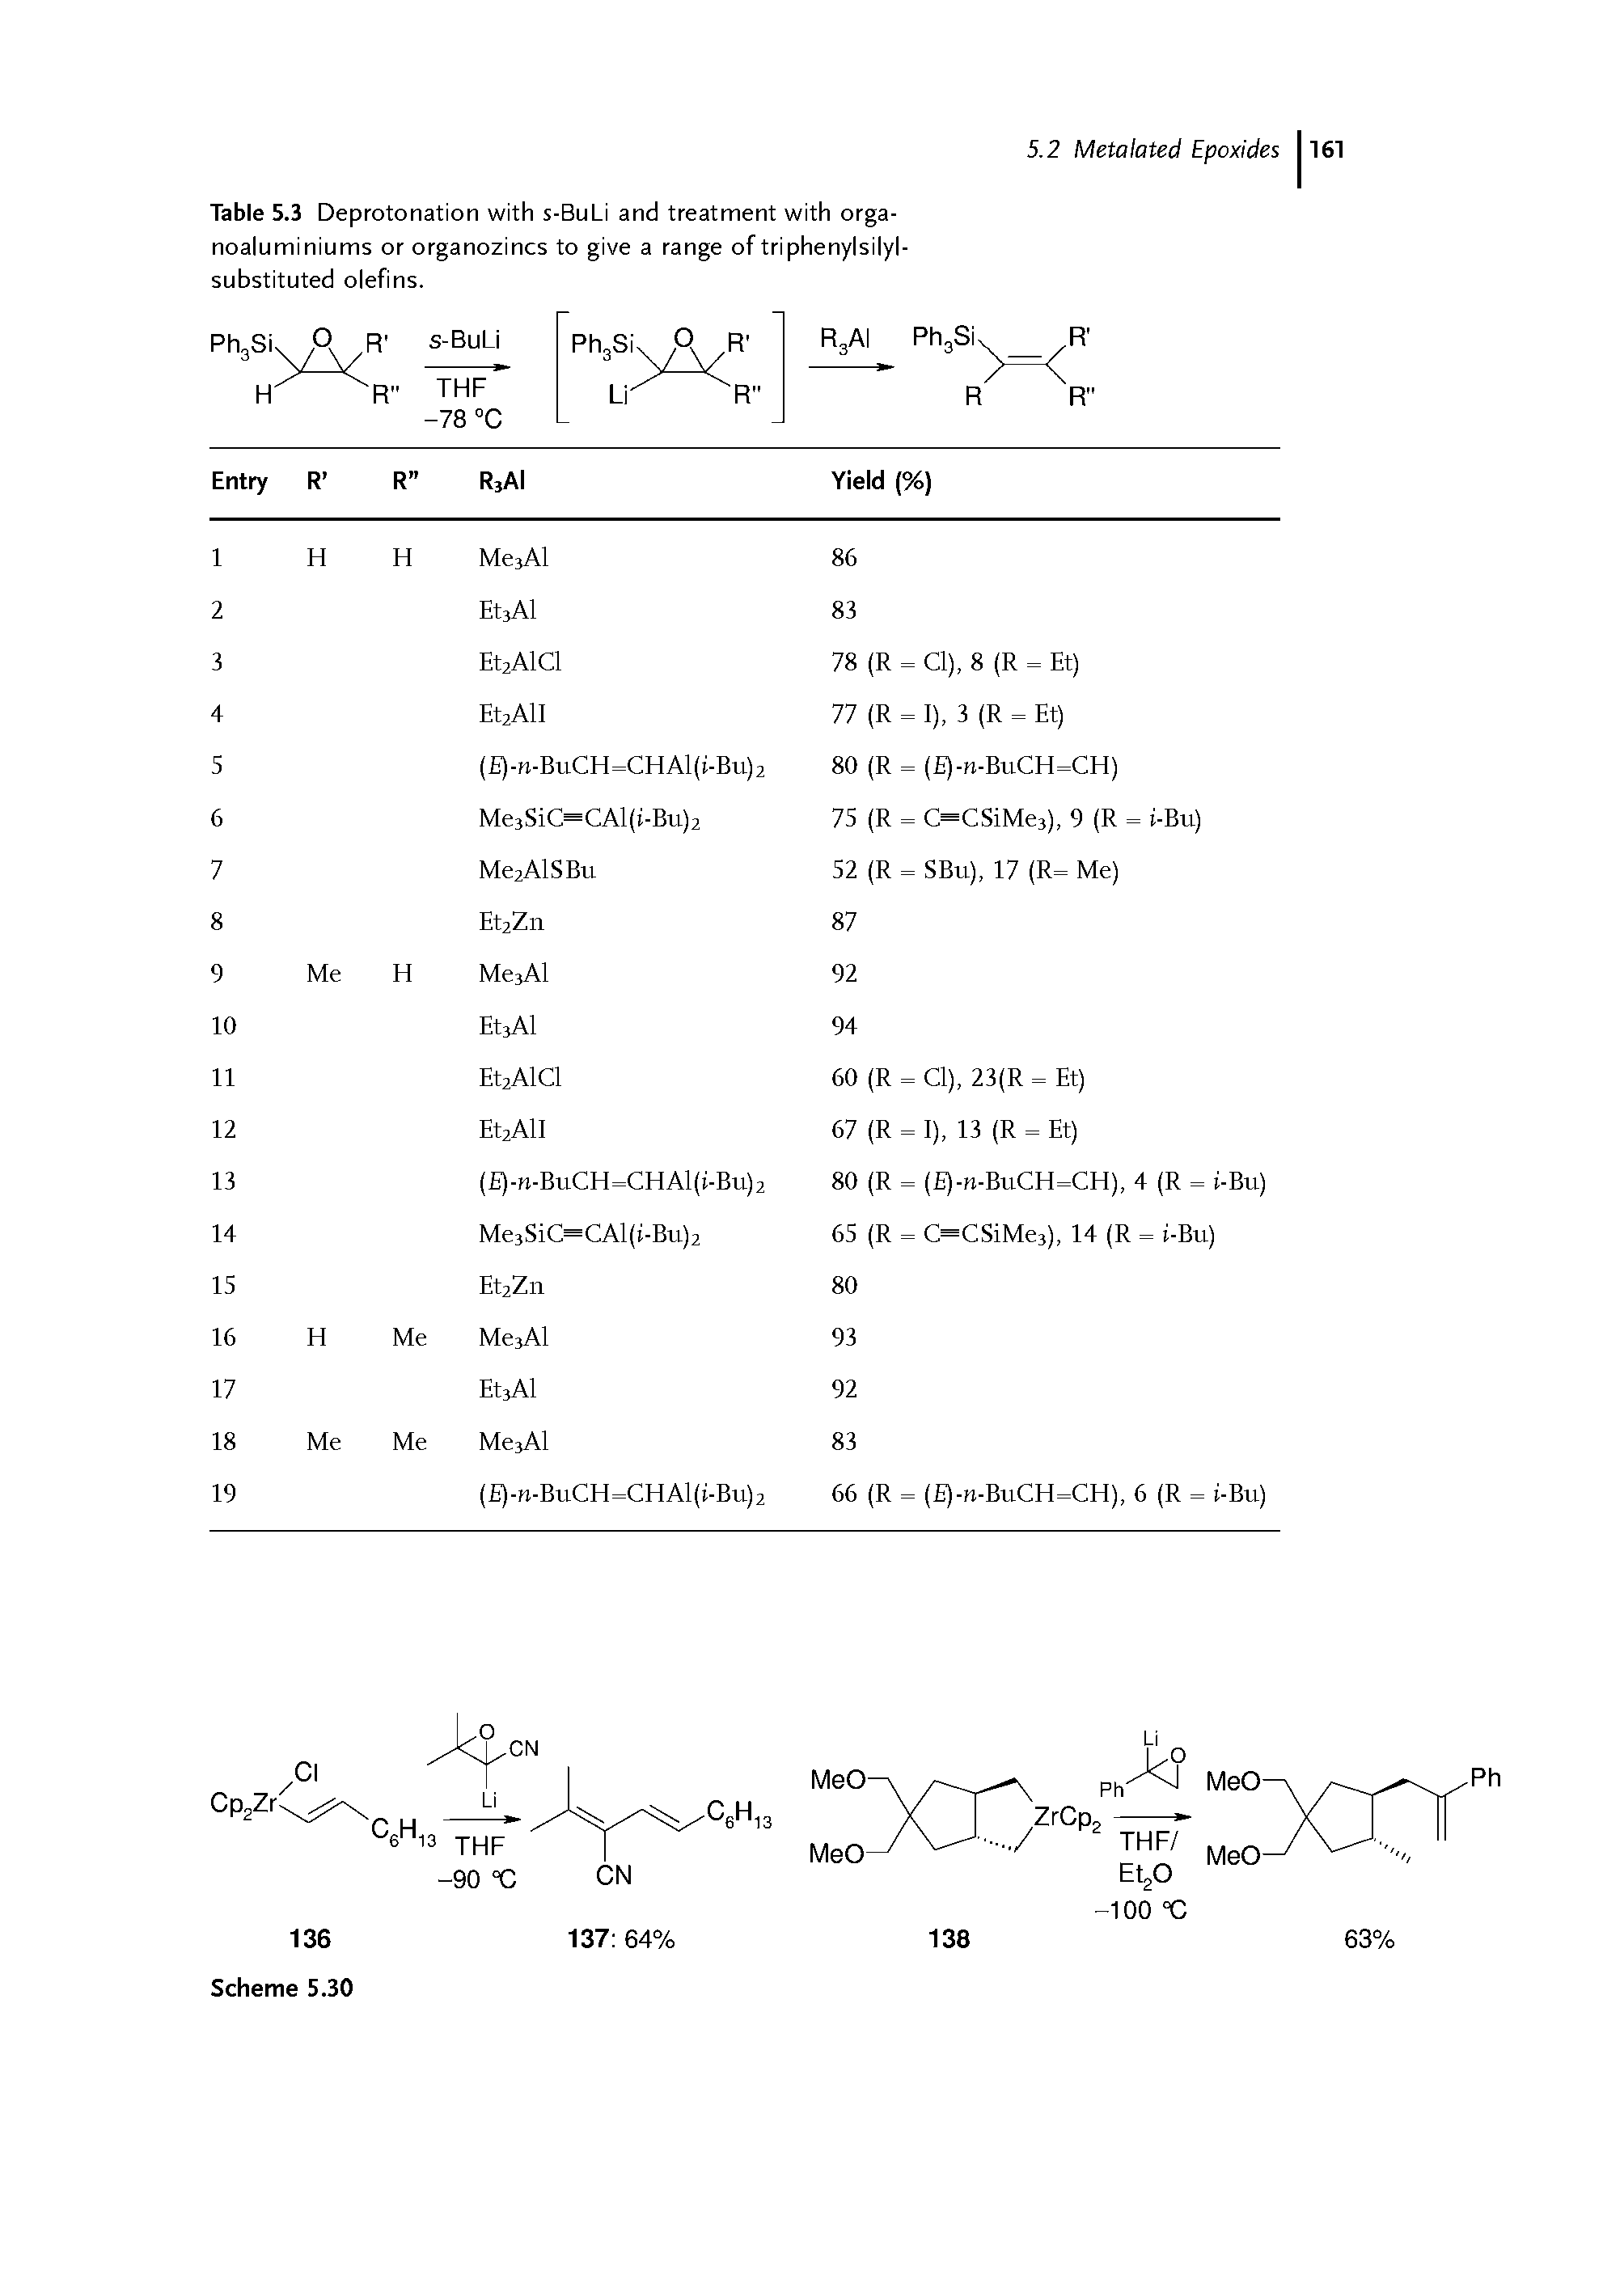 Table 5.3 Deprotonation with s-BuLi and treatment with orga-noaluminiums or organozincs to give a range of triphenylsilyl-substituted olefins.